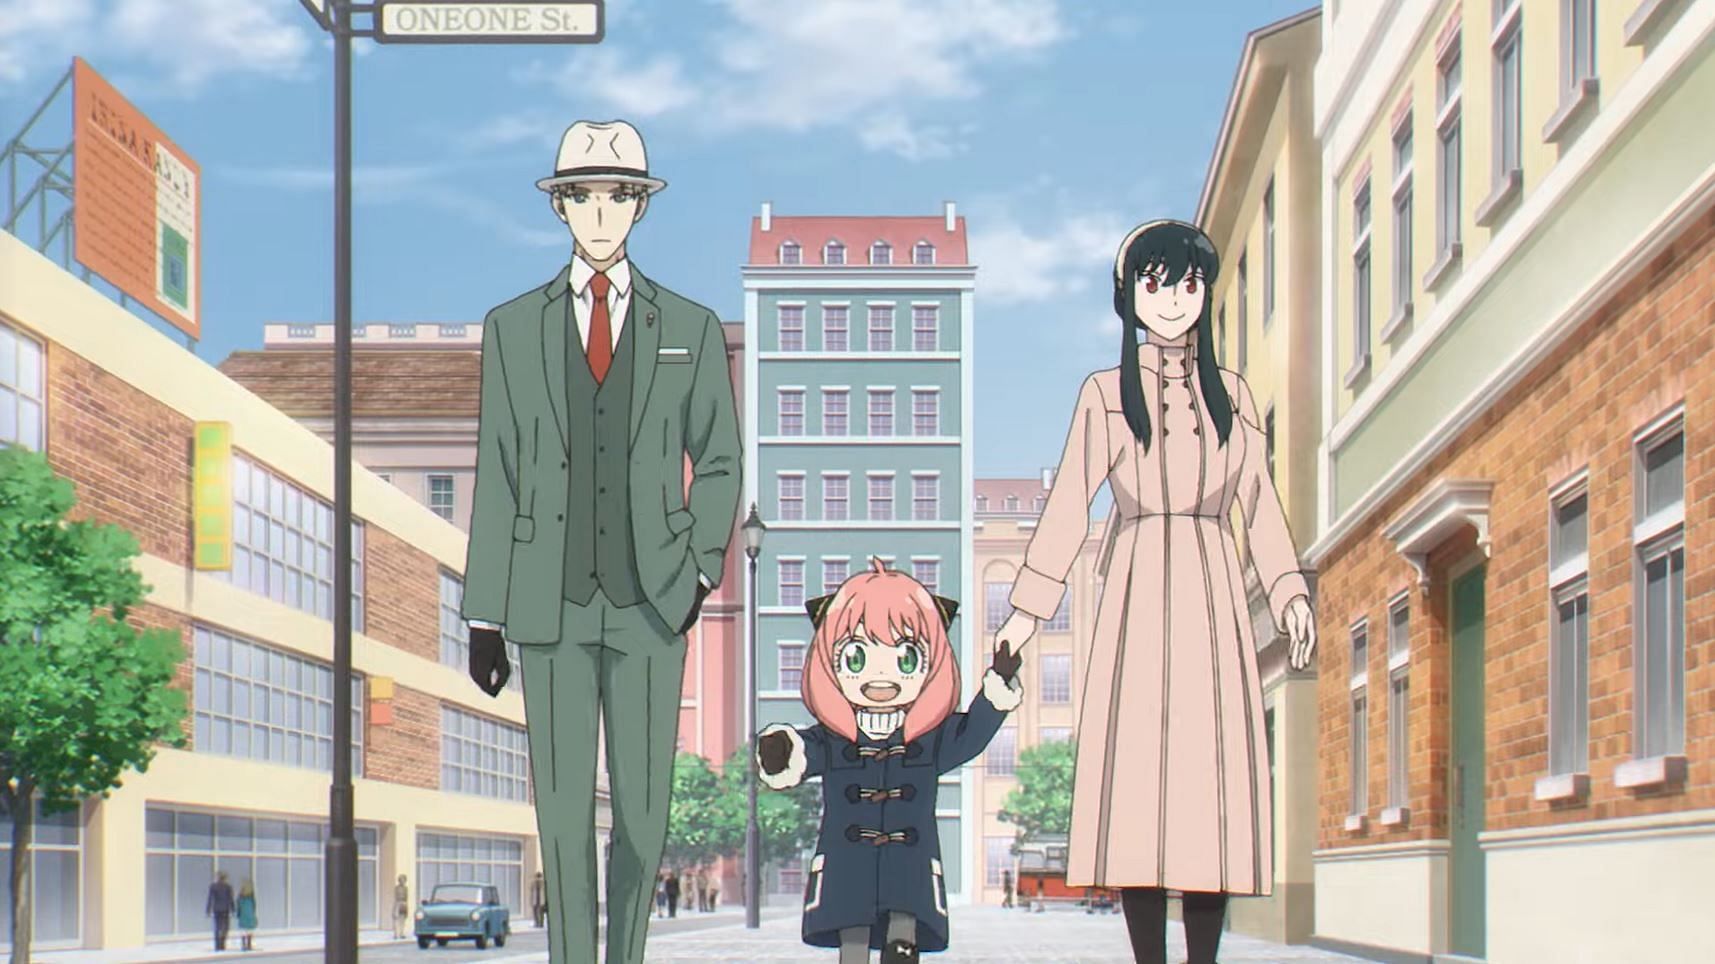 Spy X Family anime RELEASE DATE: When is episode 13 and part 2